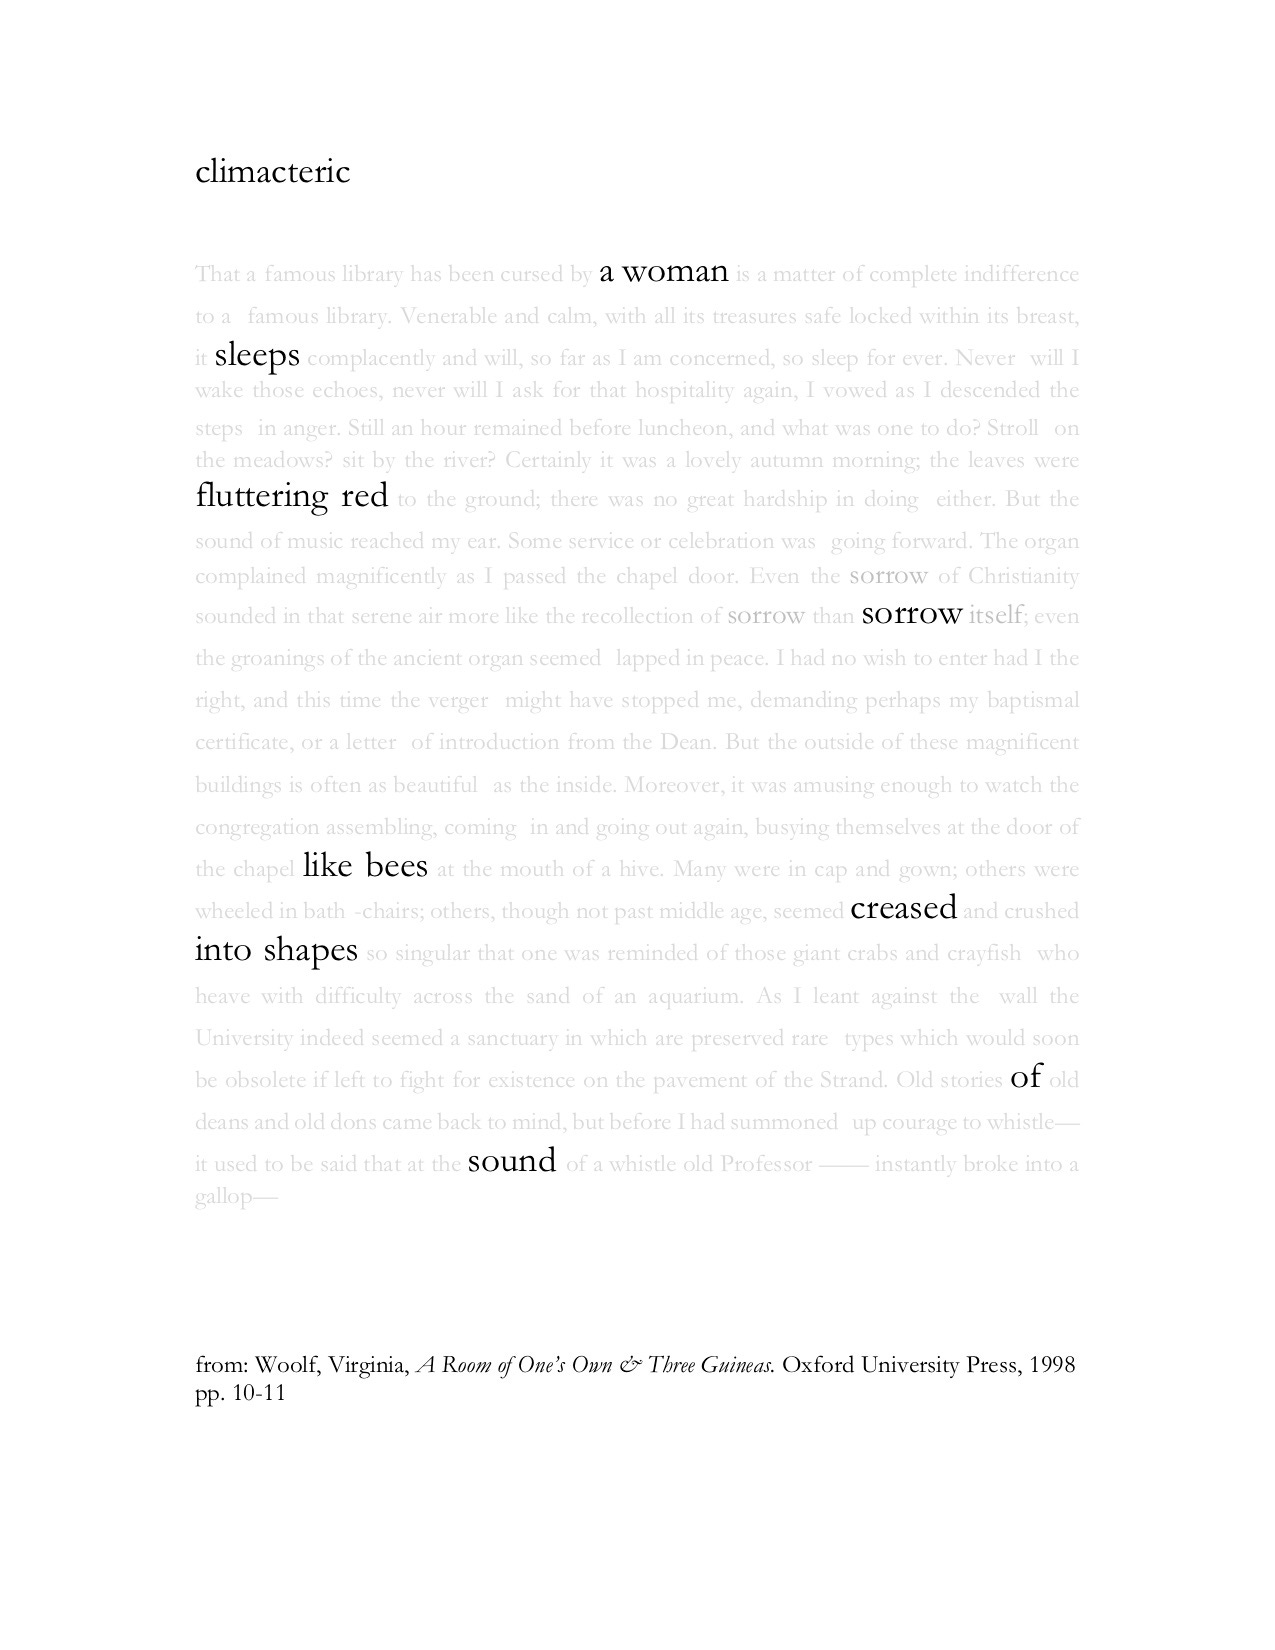 This is an erasure poem of a page from Virginia Woolf's A Room of One's One. It is black print on a white background. The title is climacteric. The text reads: a woman sleeps fluttering red sorrow like bees creased into the shape of sound.